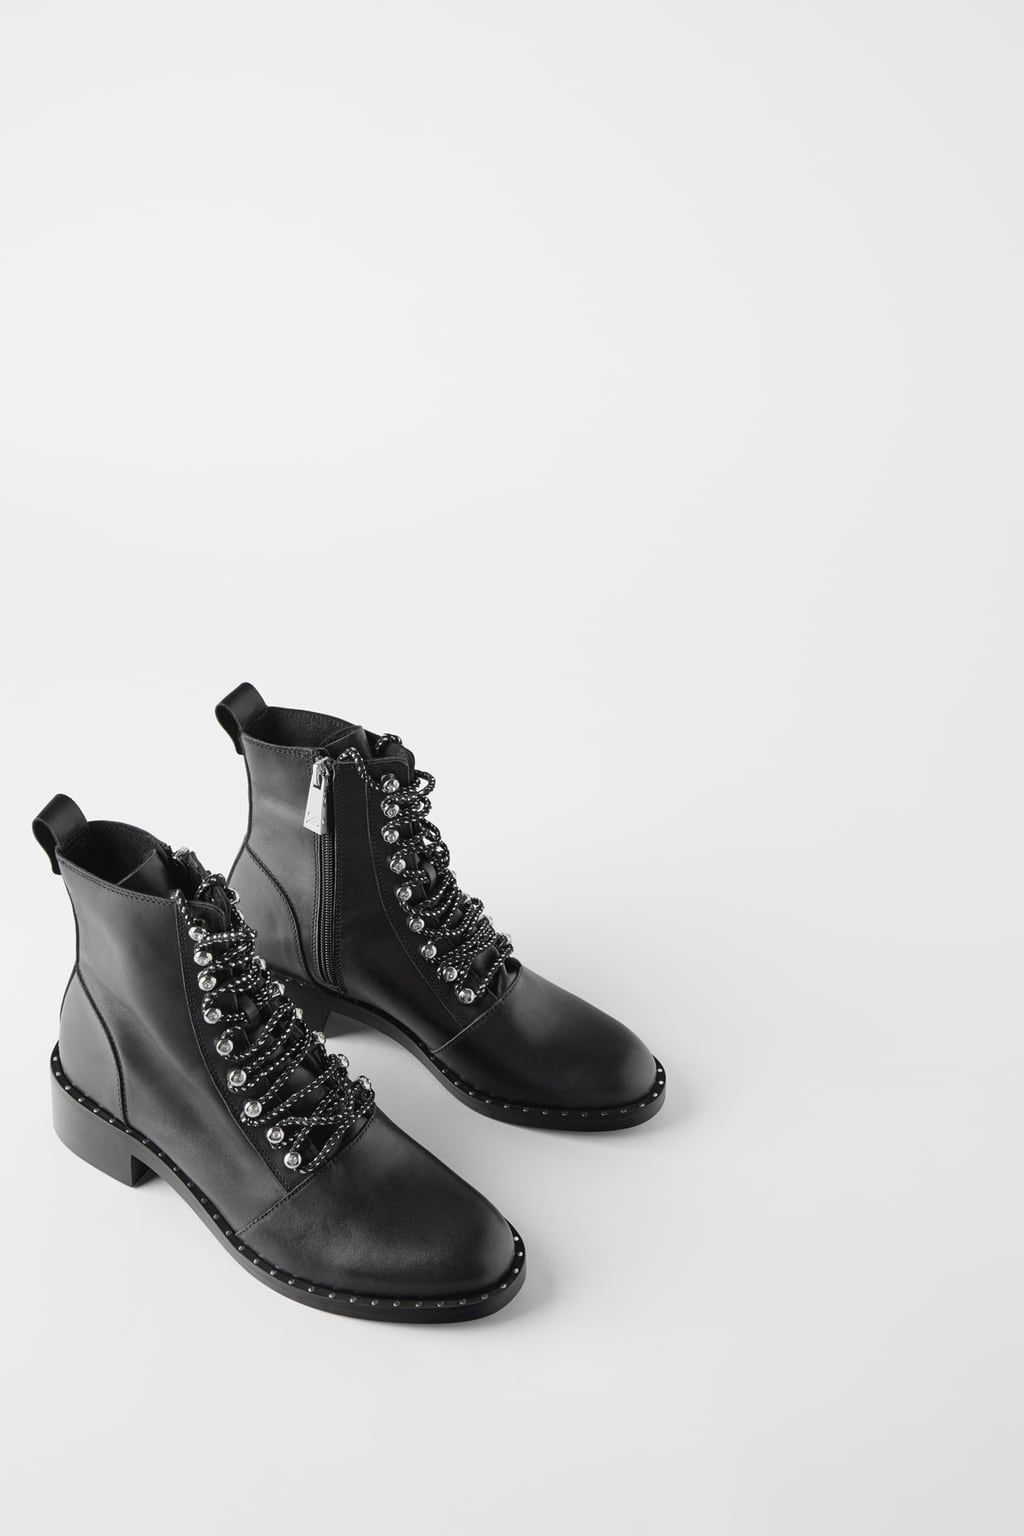 zara ankle boots with studs